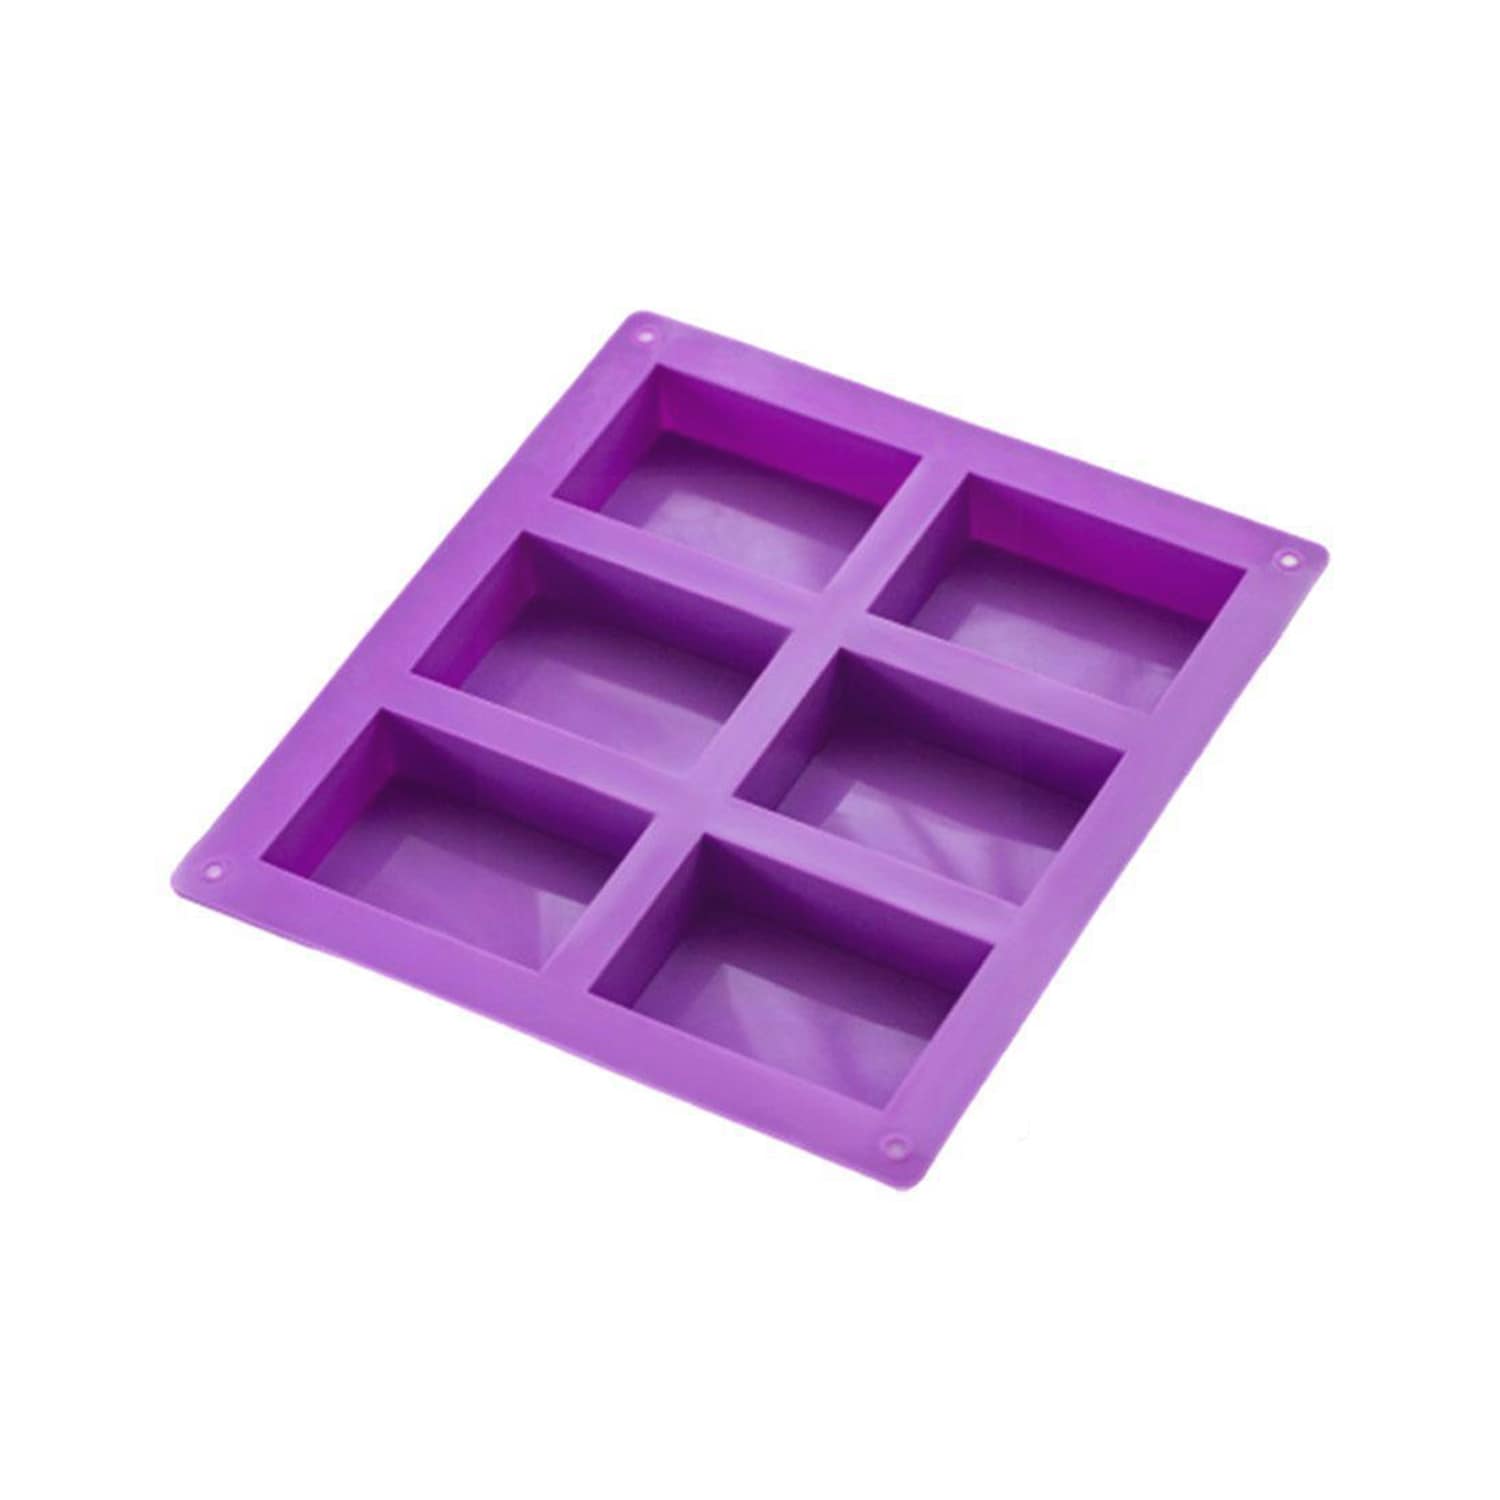 Buy Rectangle Shape Silicone Mold ( 6 Cavities ) Online